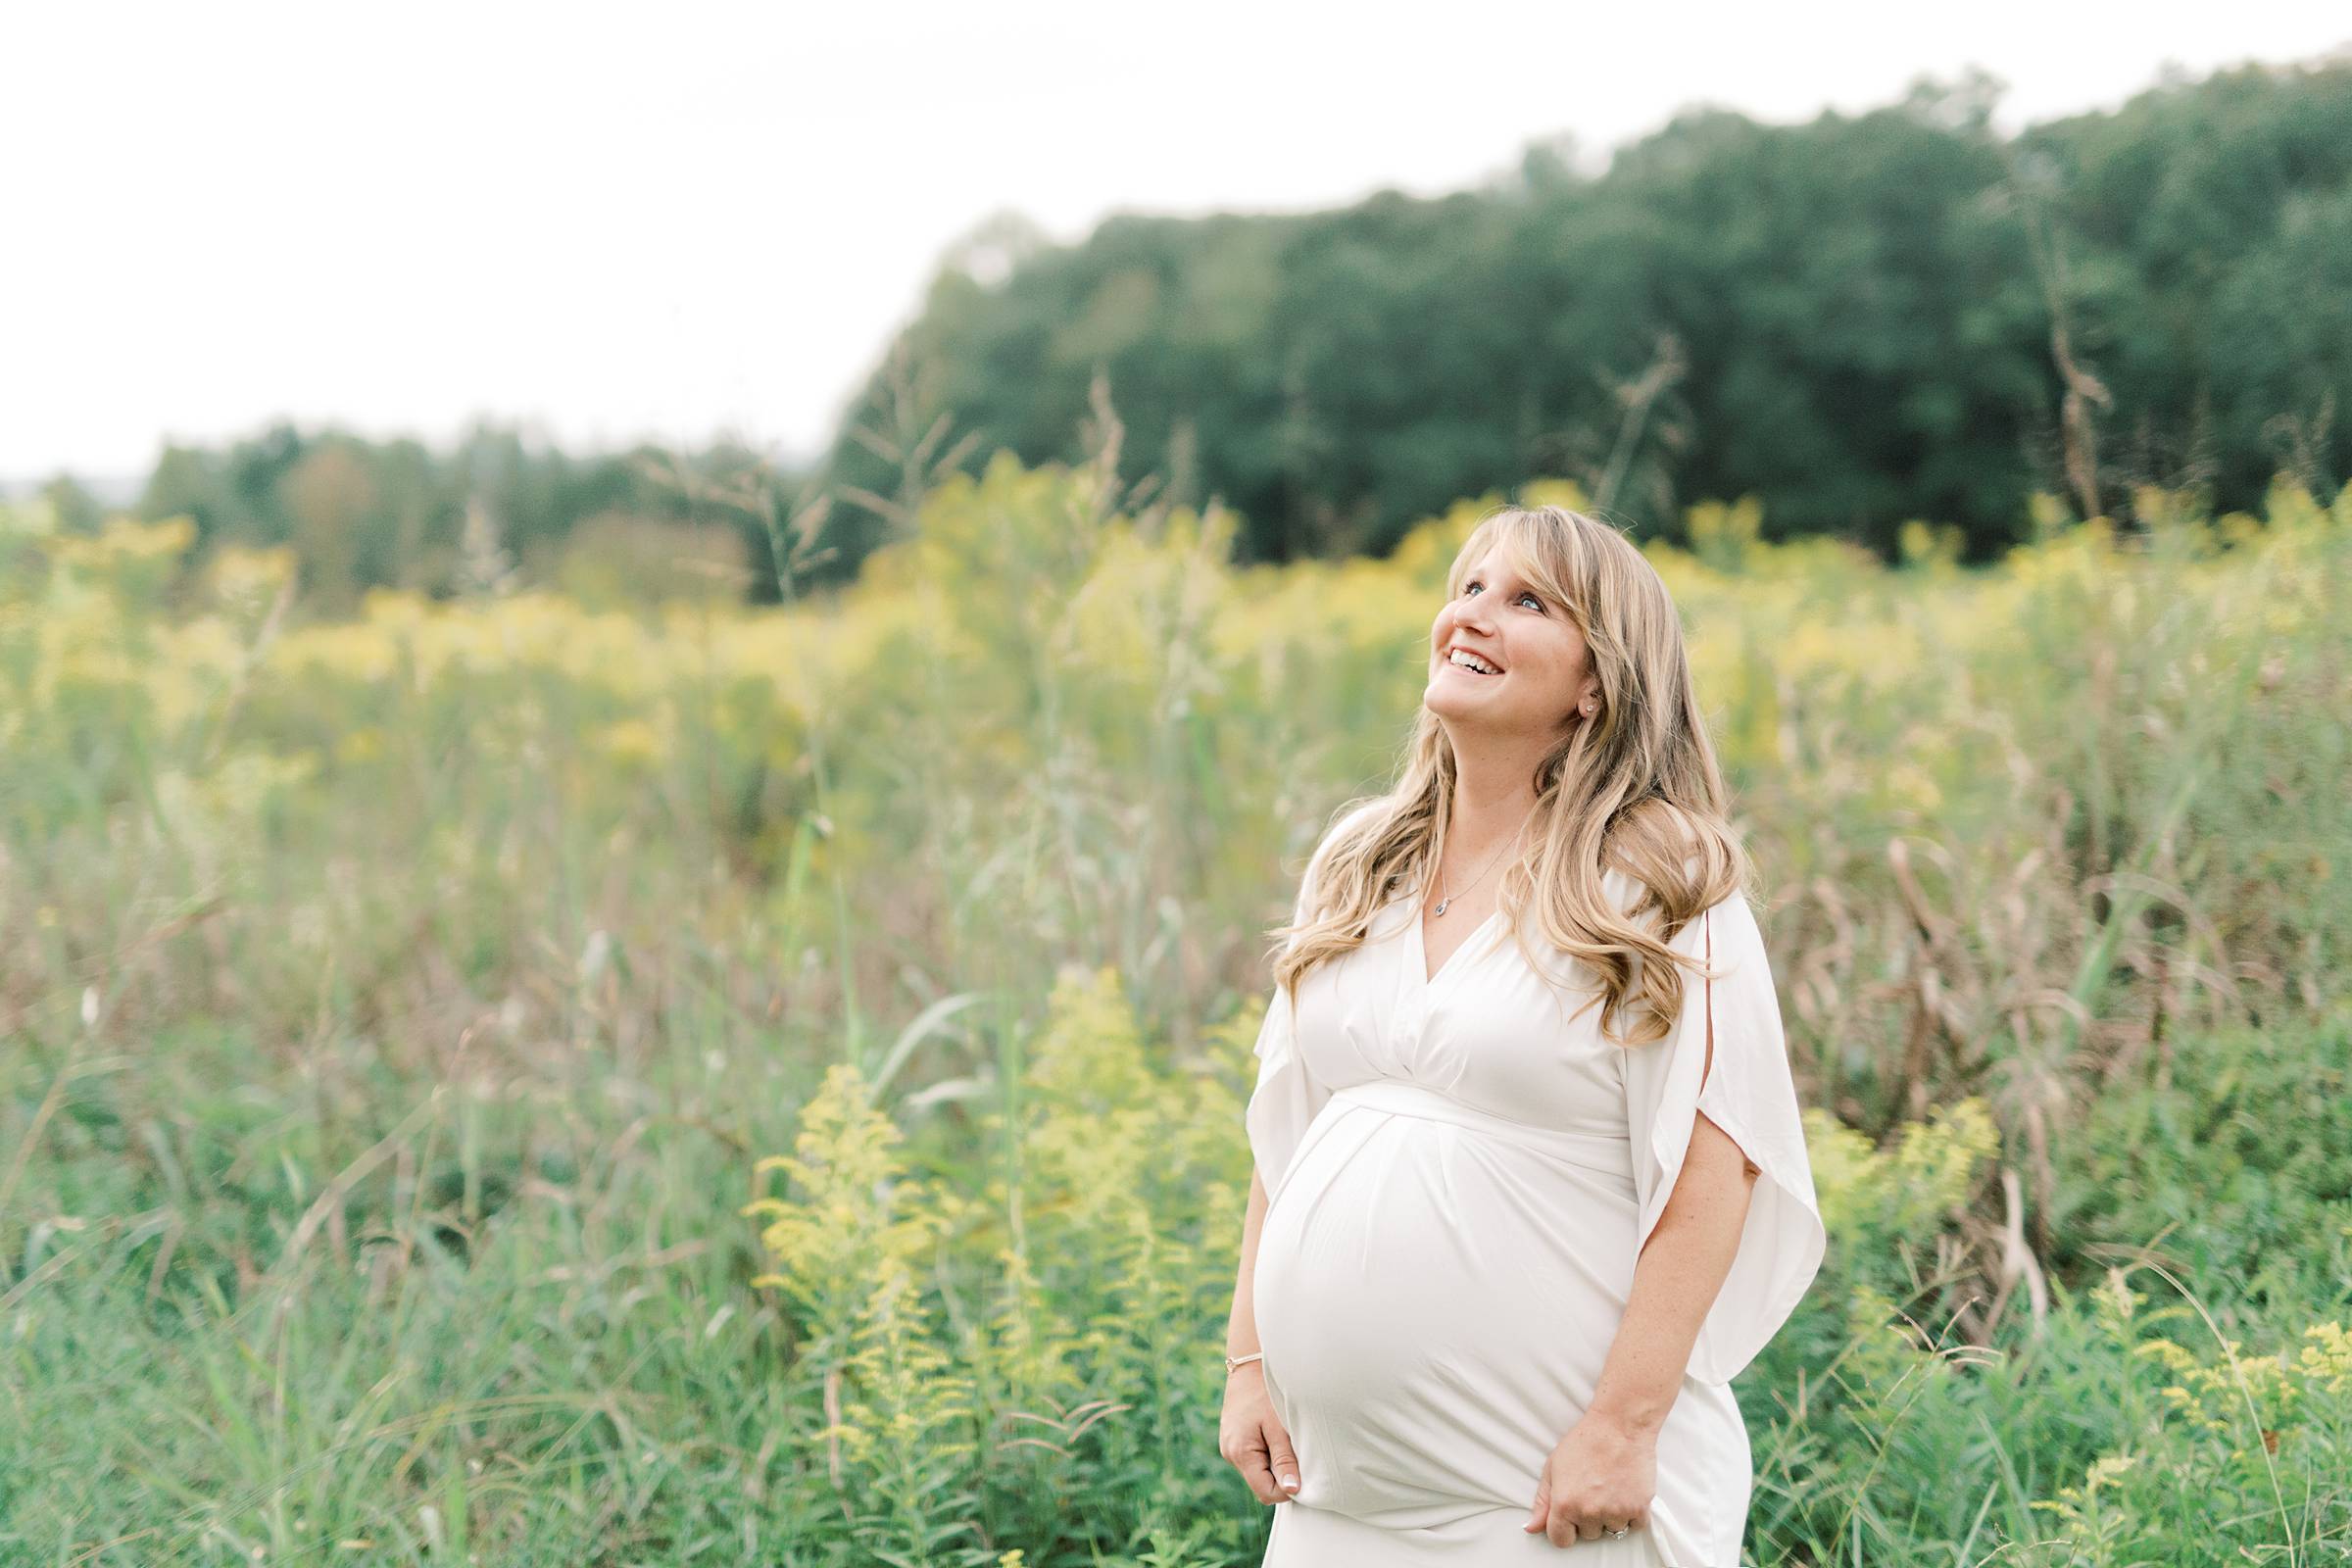 Pregnant woman in white dress in a field of wildflowers